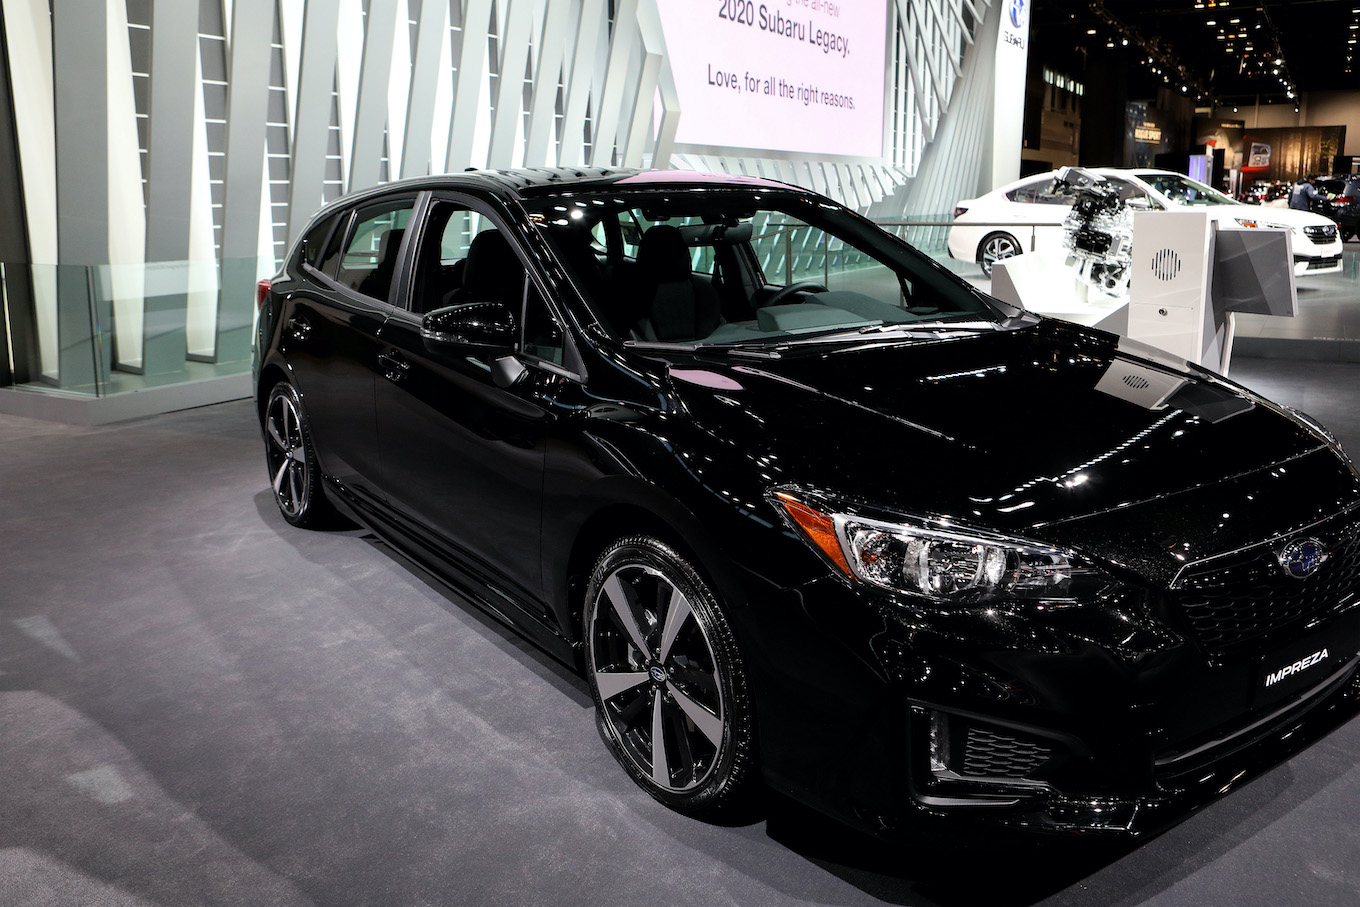 2019 Subaru Impreza is on display at the 111th Annual Chicago Auto Show